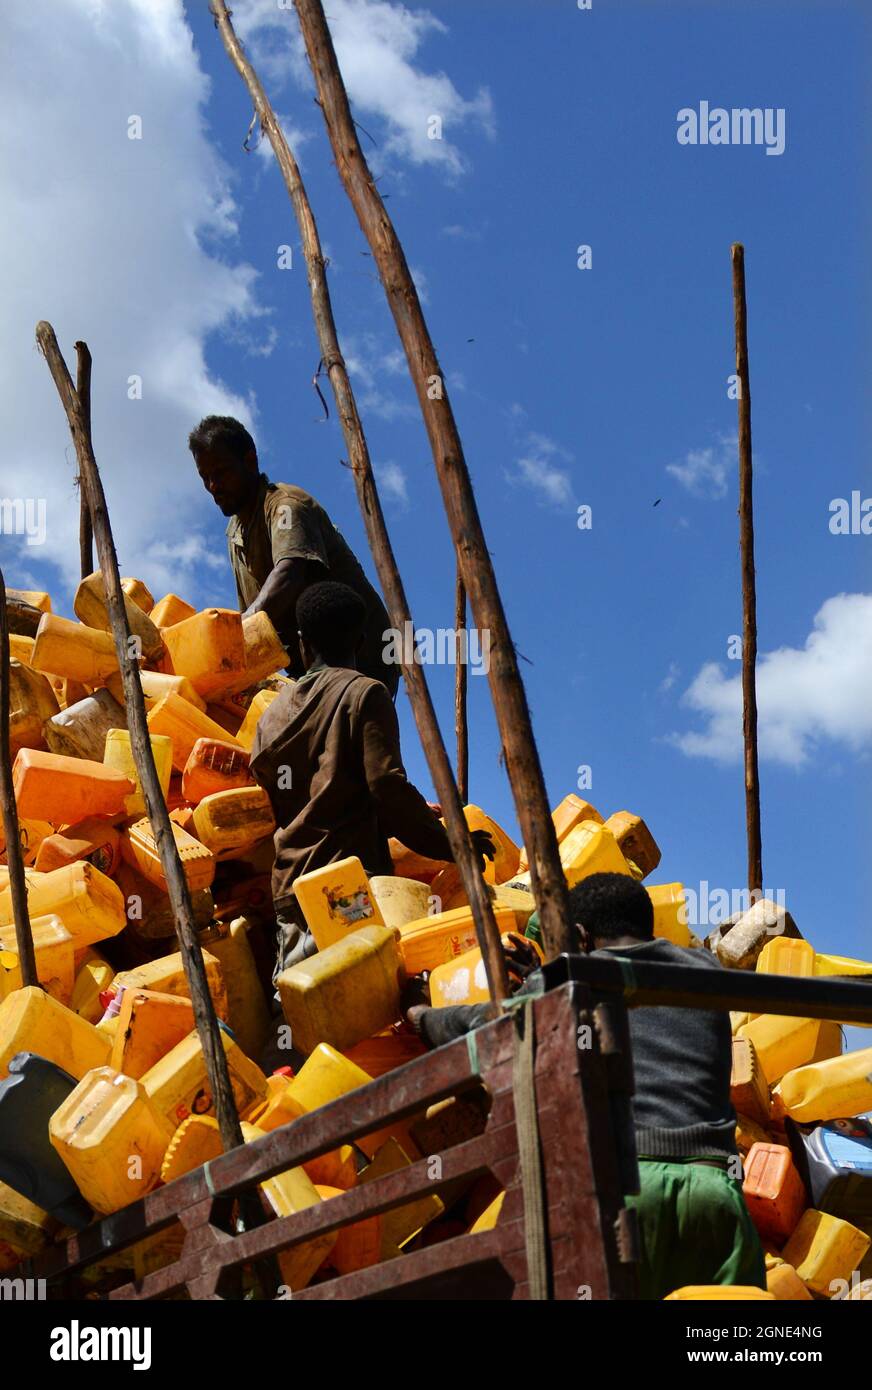 Ethiopian men loading a truck with empty yellow jerrycans. Stock Photo